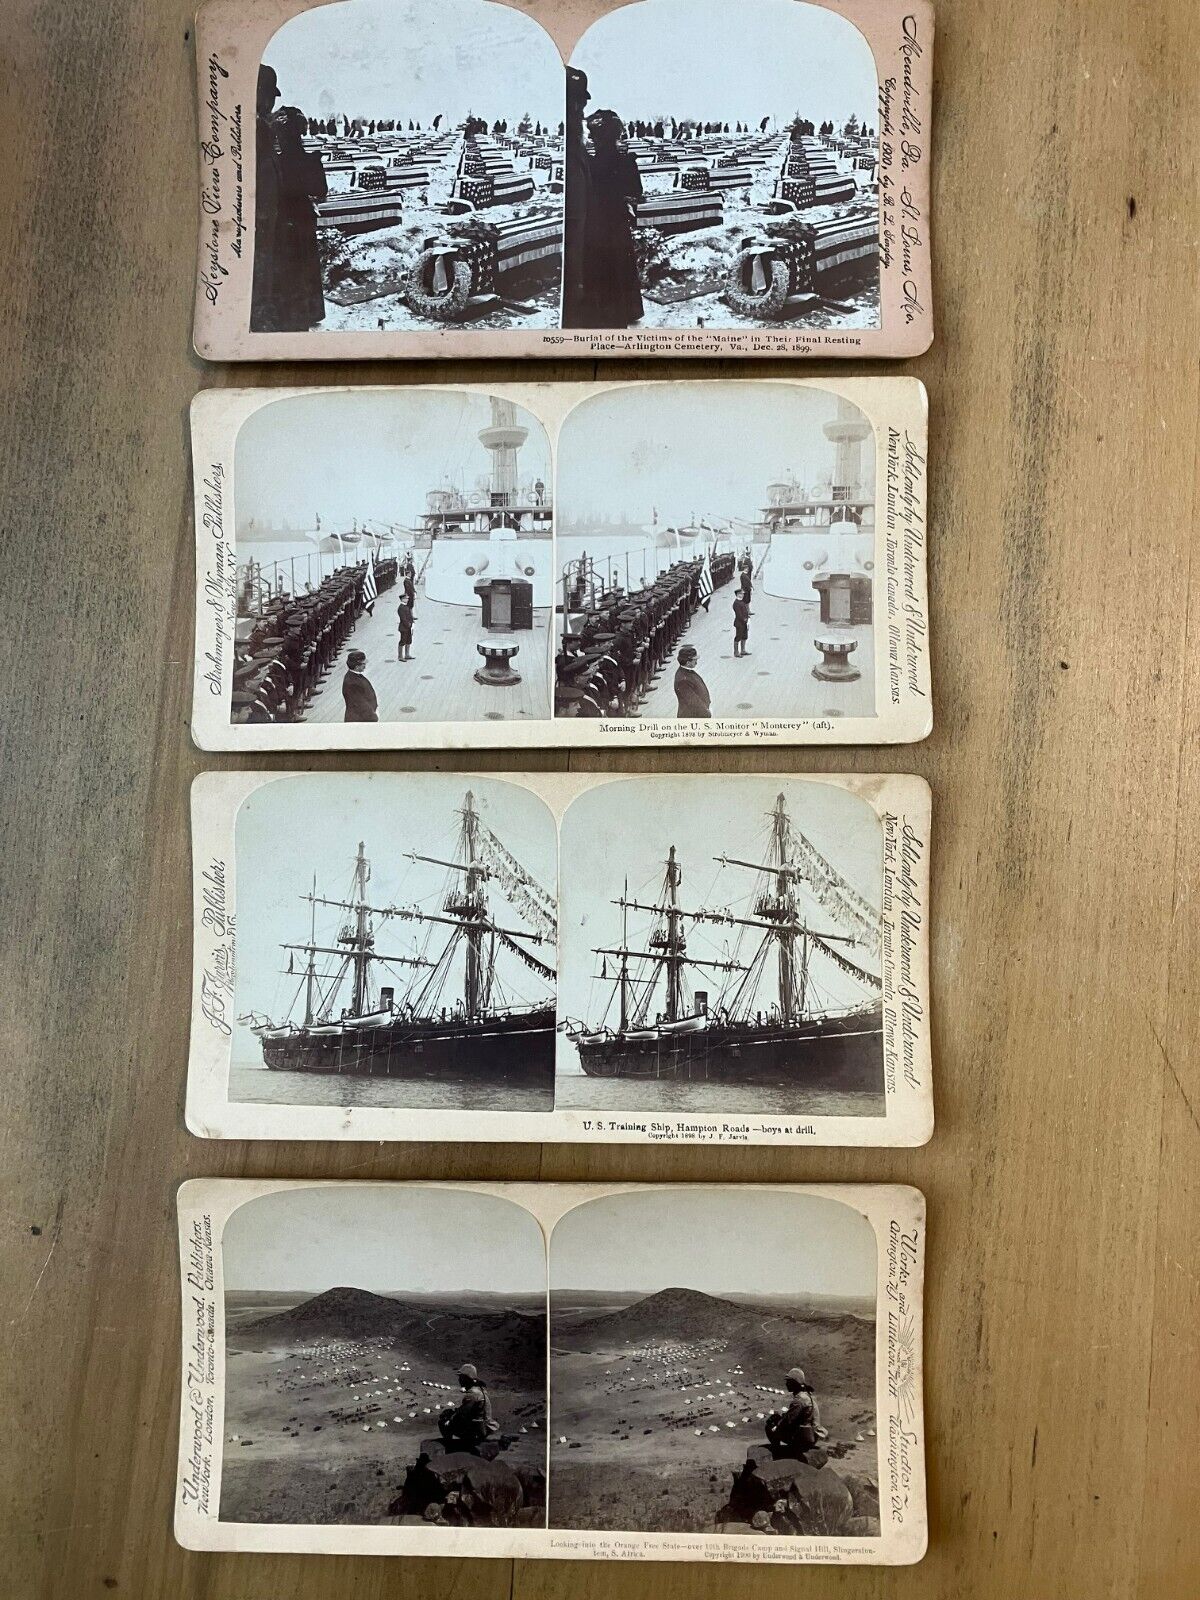 Antique Stereoview Card - Lot of 4 Military Cards - 1898 to 1900